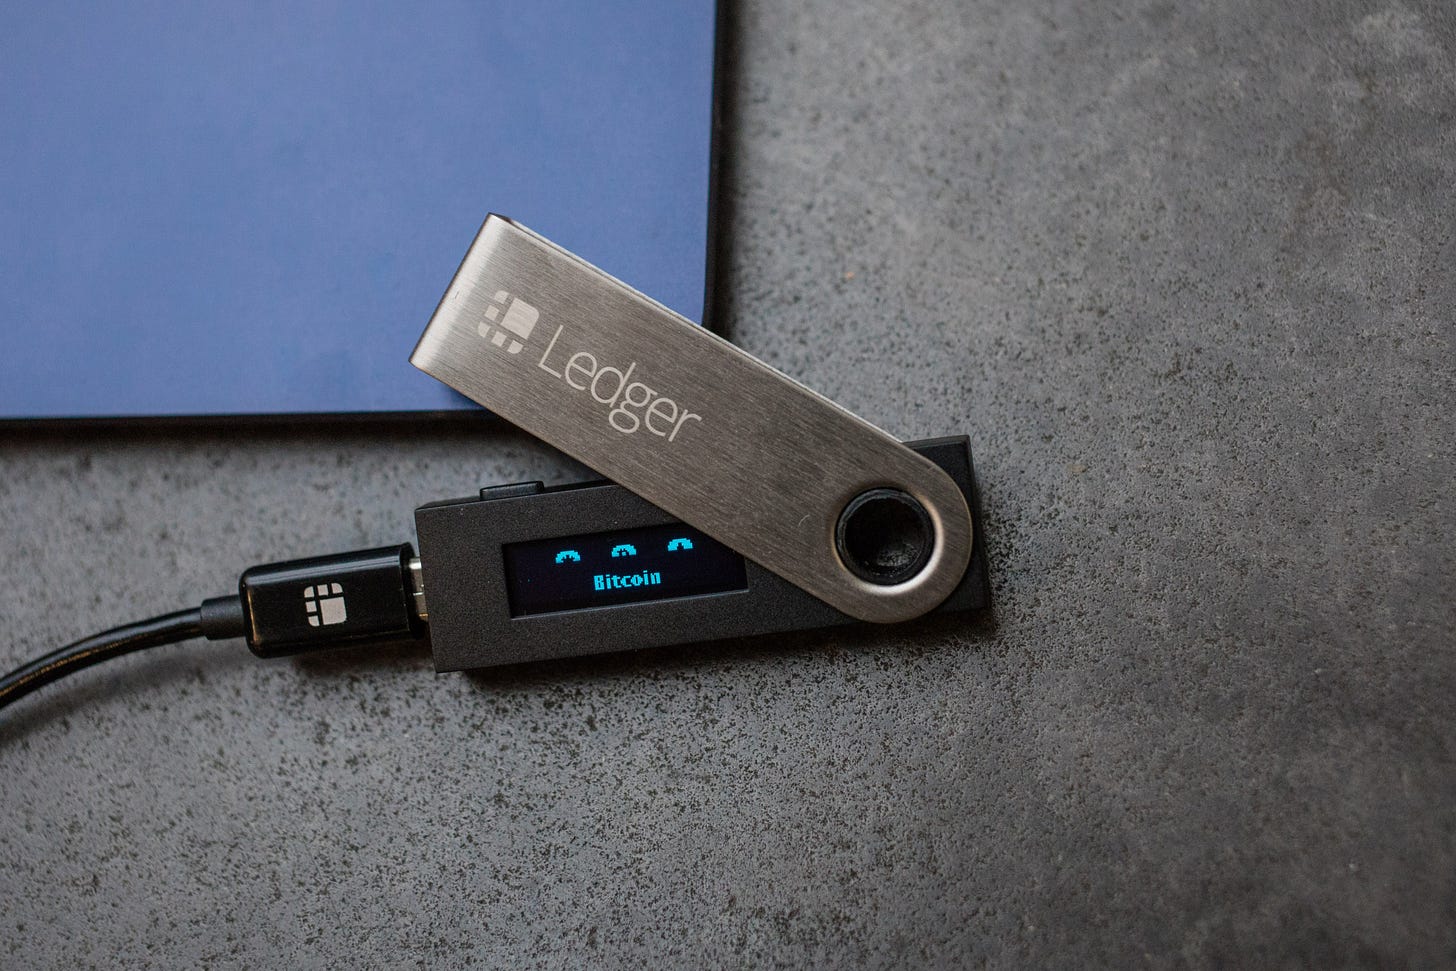 A Ledger USB dongle for storing and carrying cryptocurrency passwords at the company's headquarters in Paris.